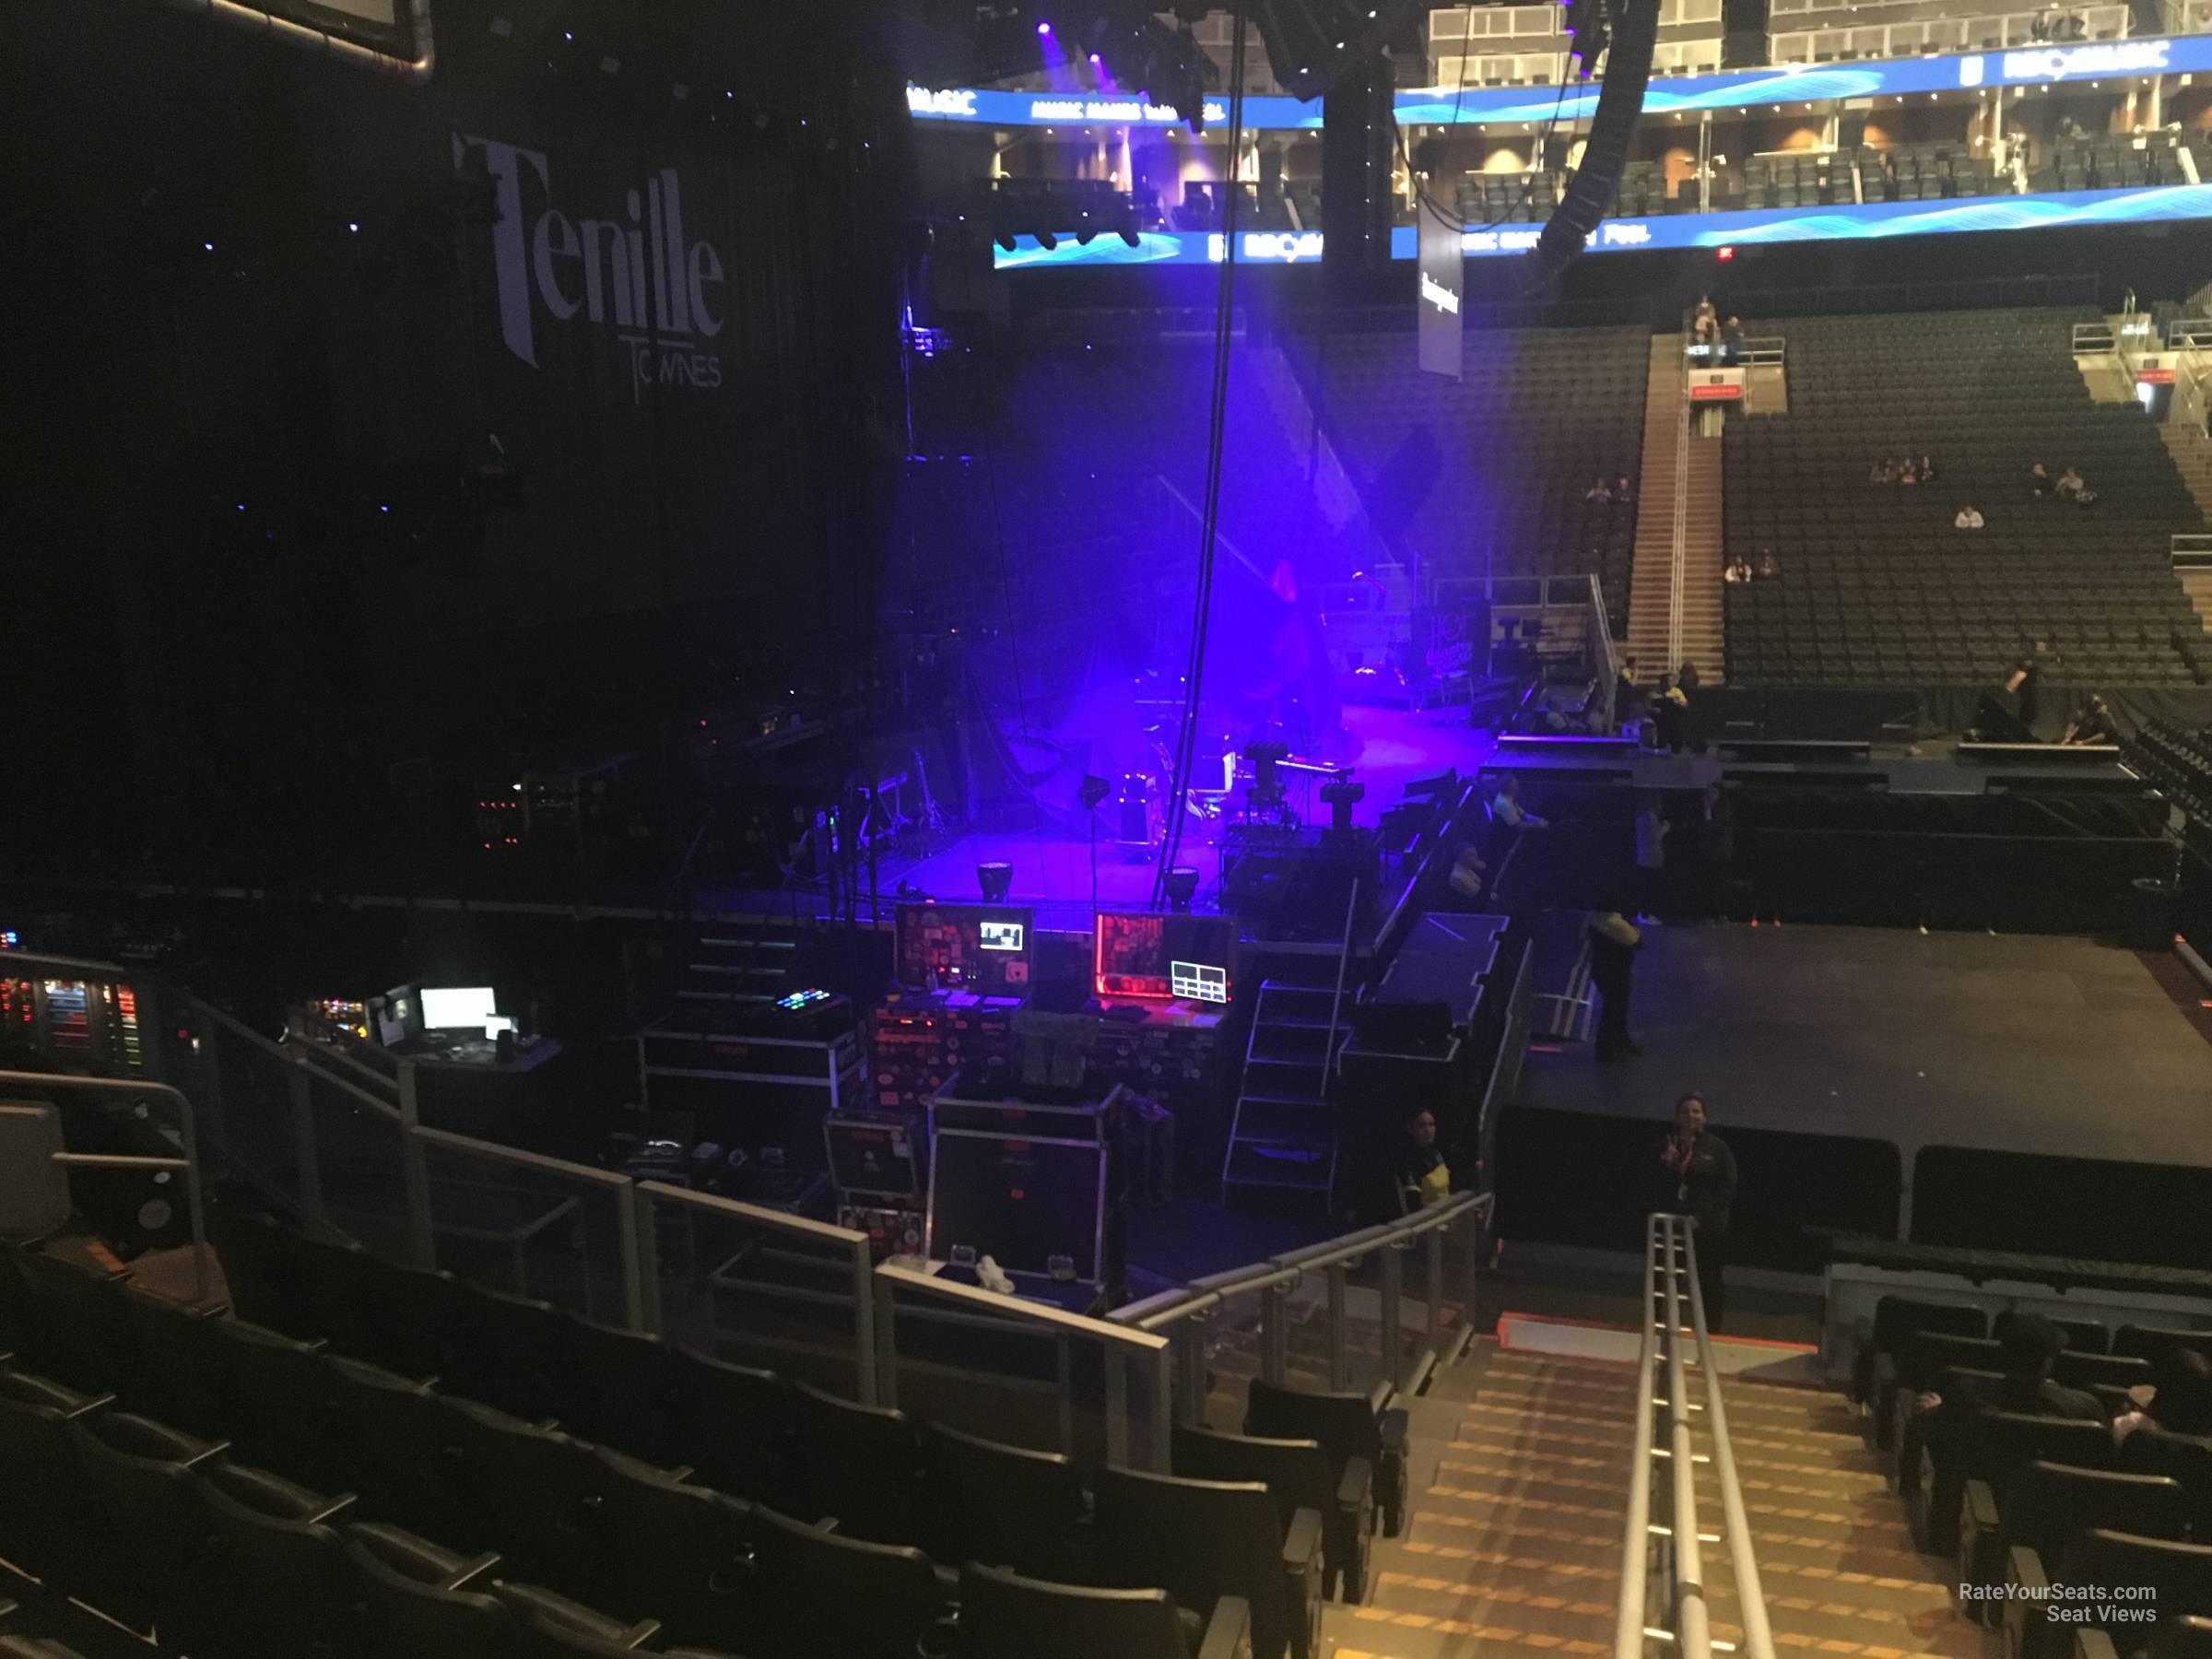 section 122, row 10 seat view  for concert - rogers place